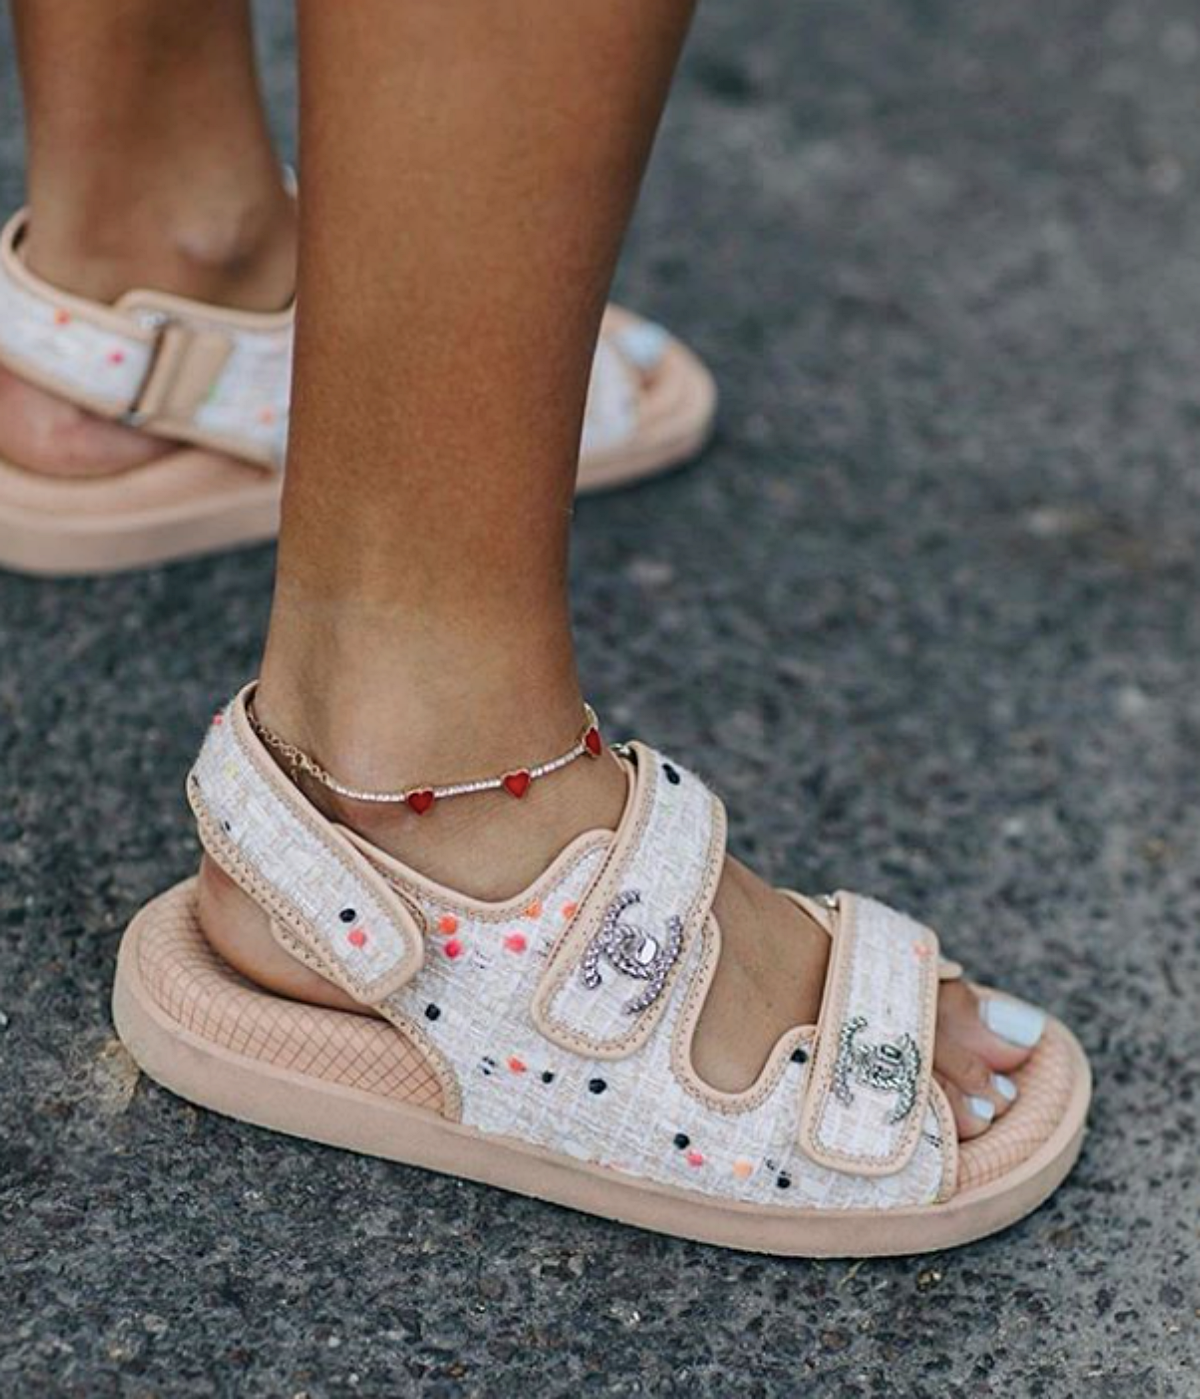 5 Looks Approving These Chanel Sandals as the Trend of Summer